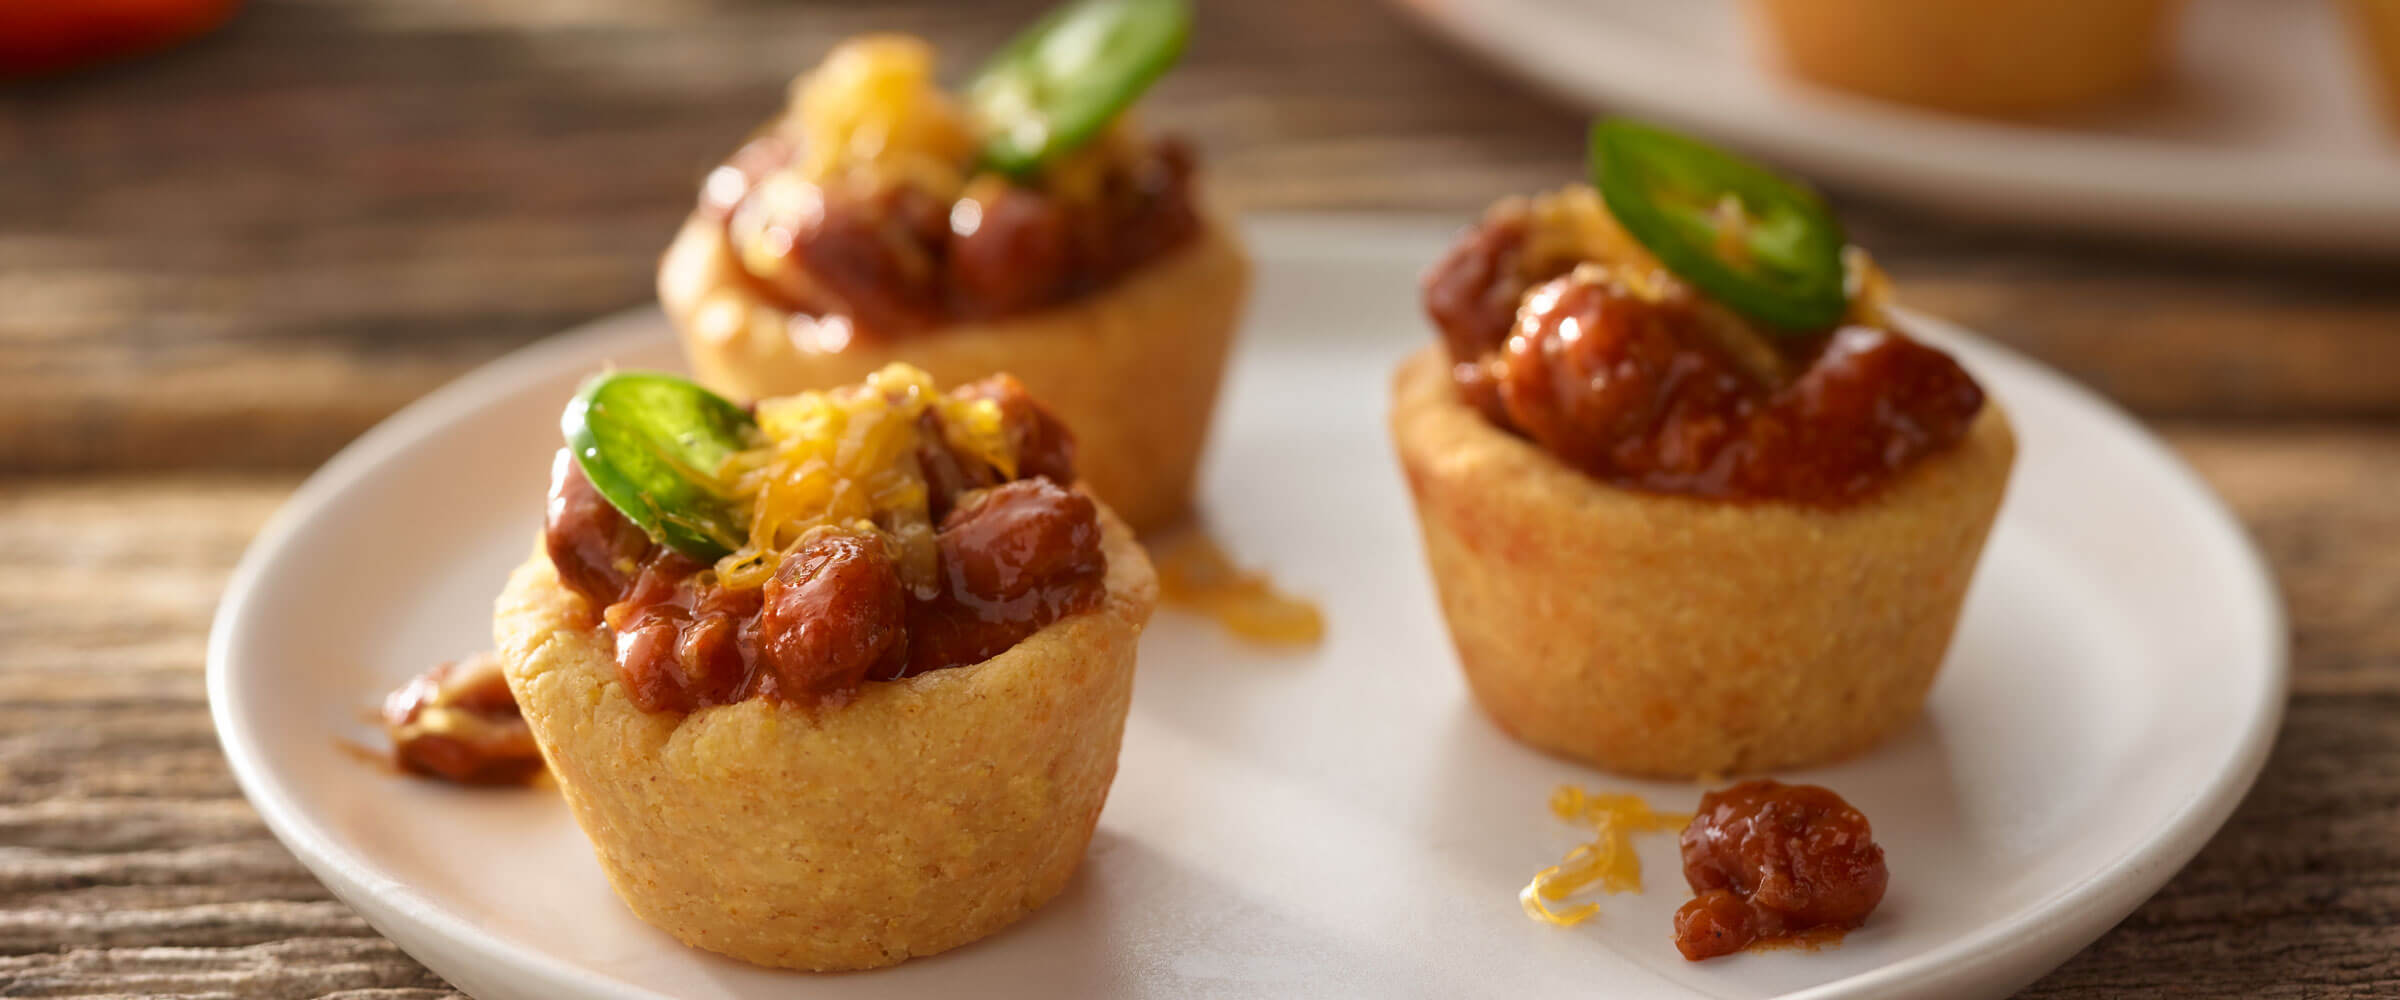 Mini Chili Cornbread Bites topped with cheese and jalapeno on a white plate